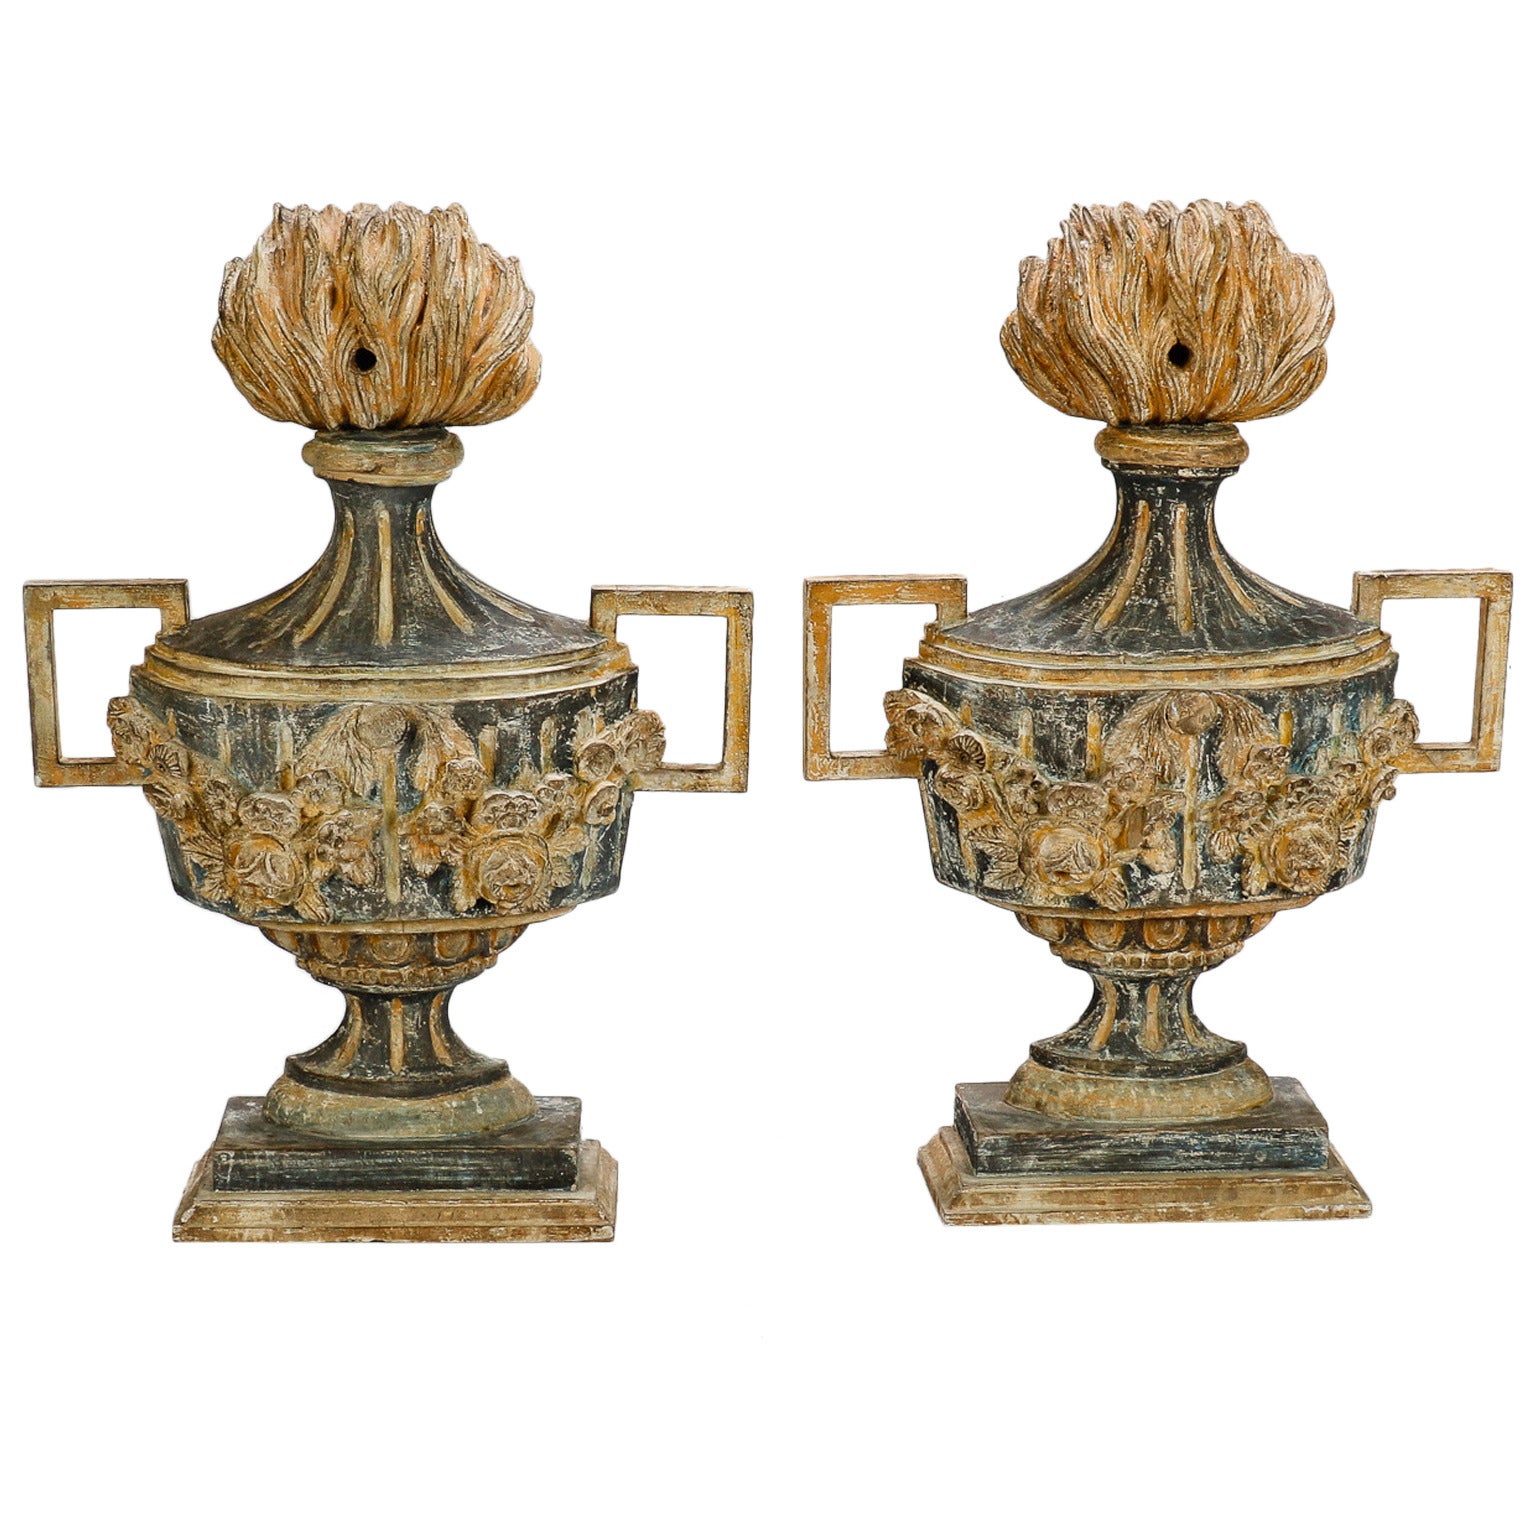 Pair of 19th Century Italian Carved Wood Decorative Urns